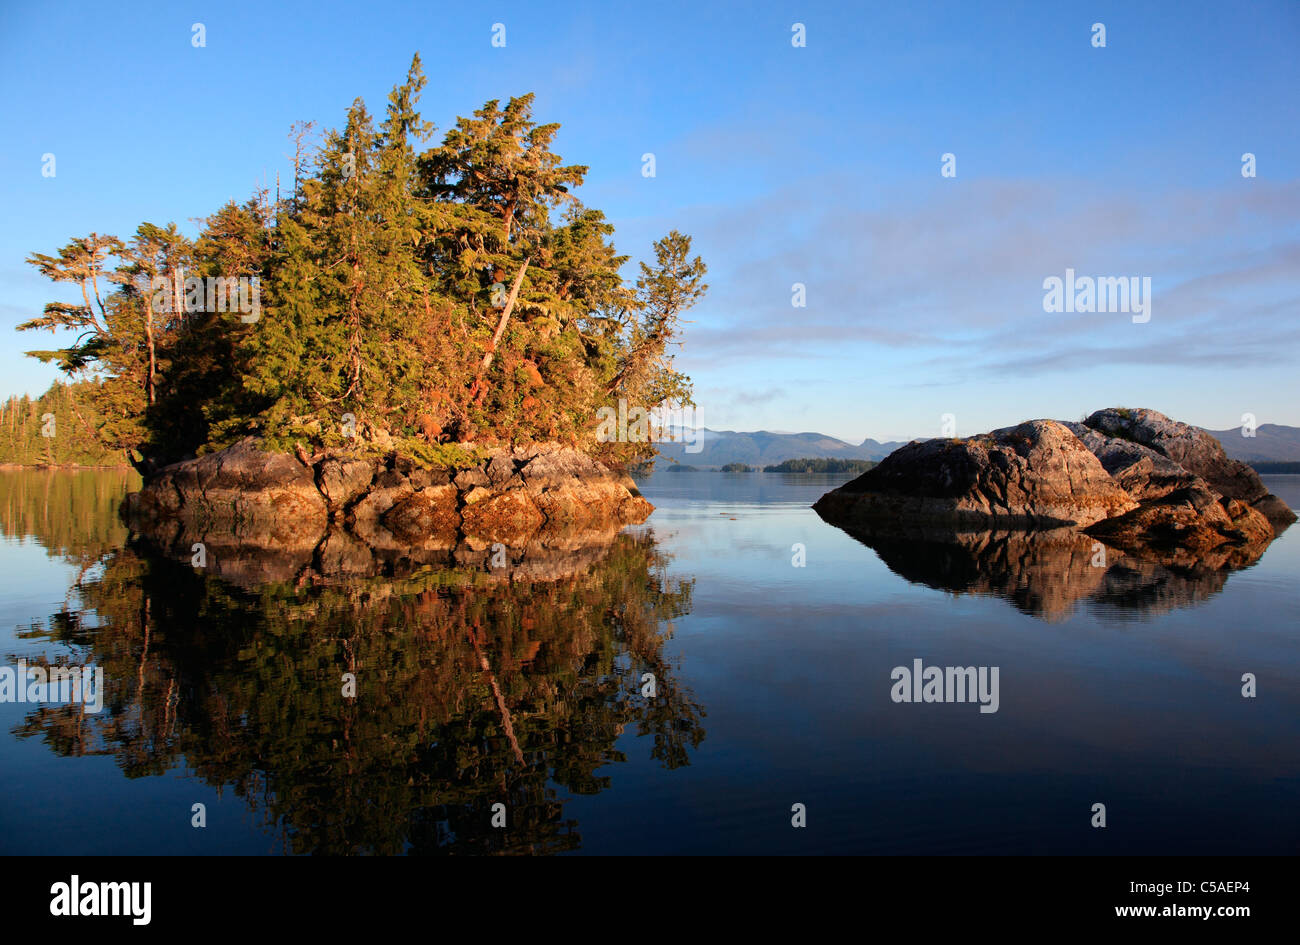 Two Islands in the broken island group Barkley sound Vancouver island BC at sunrise on a calm July morning Stock Photo